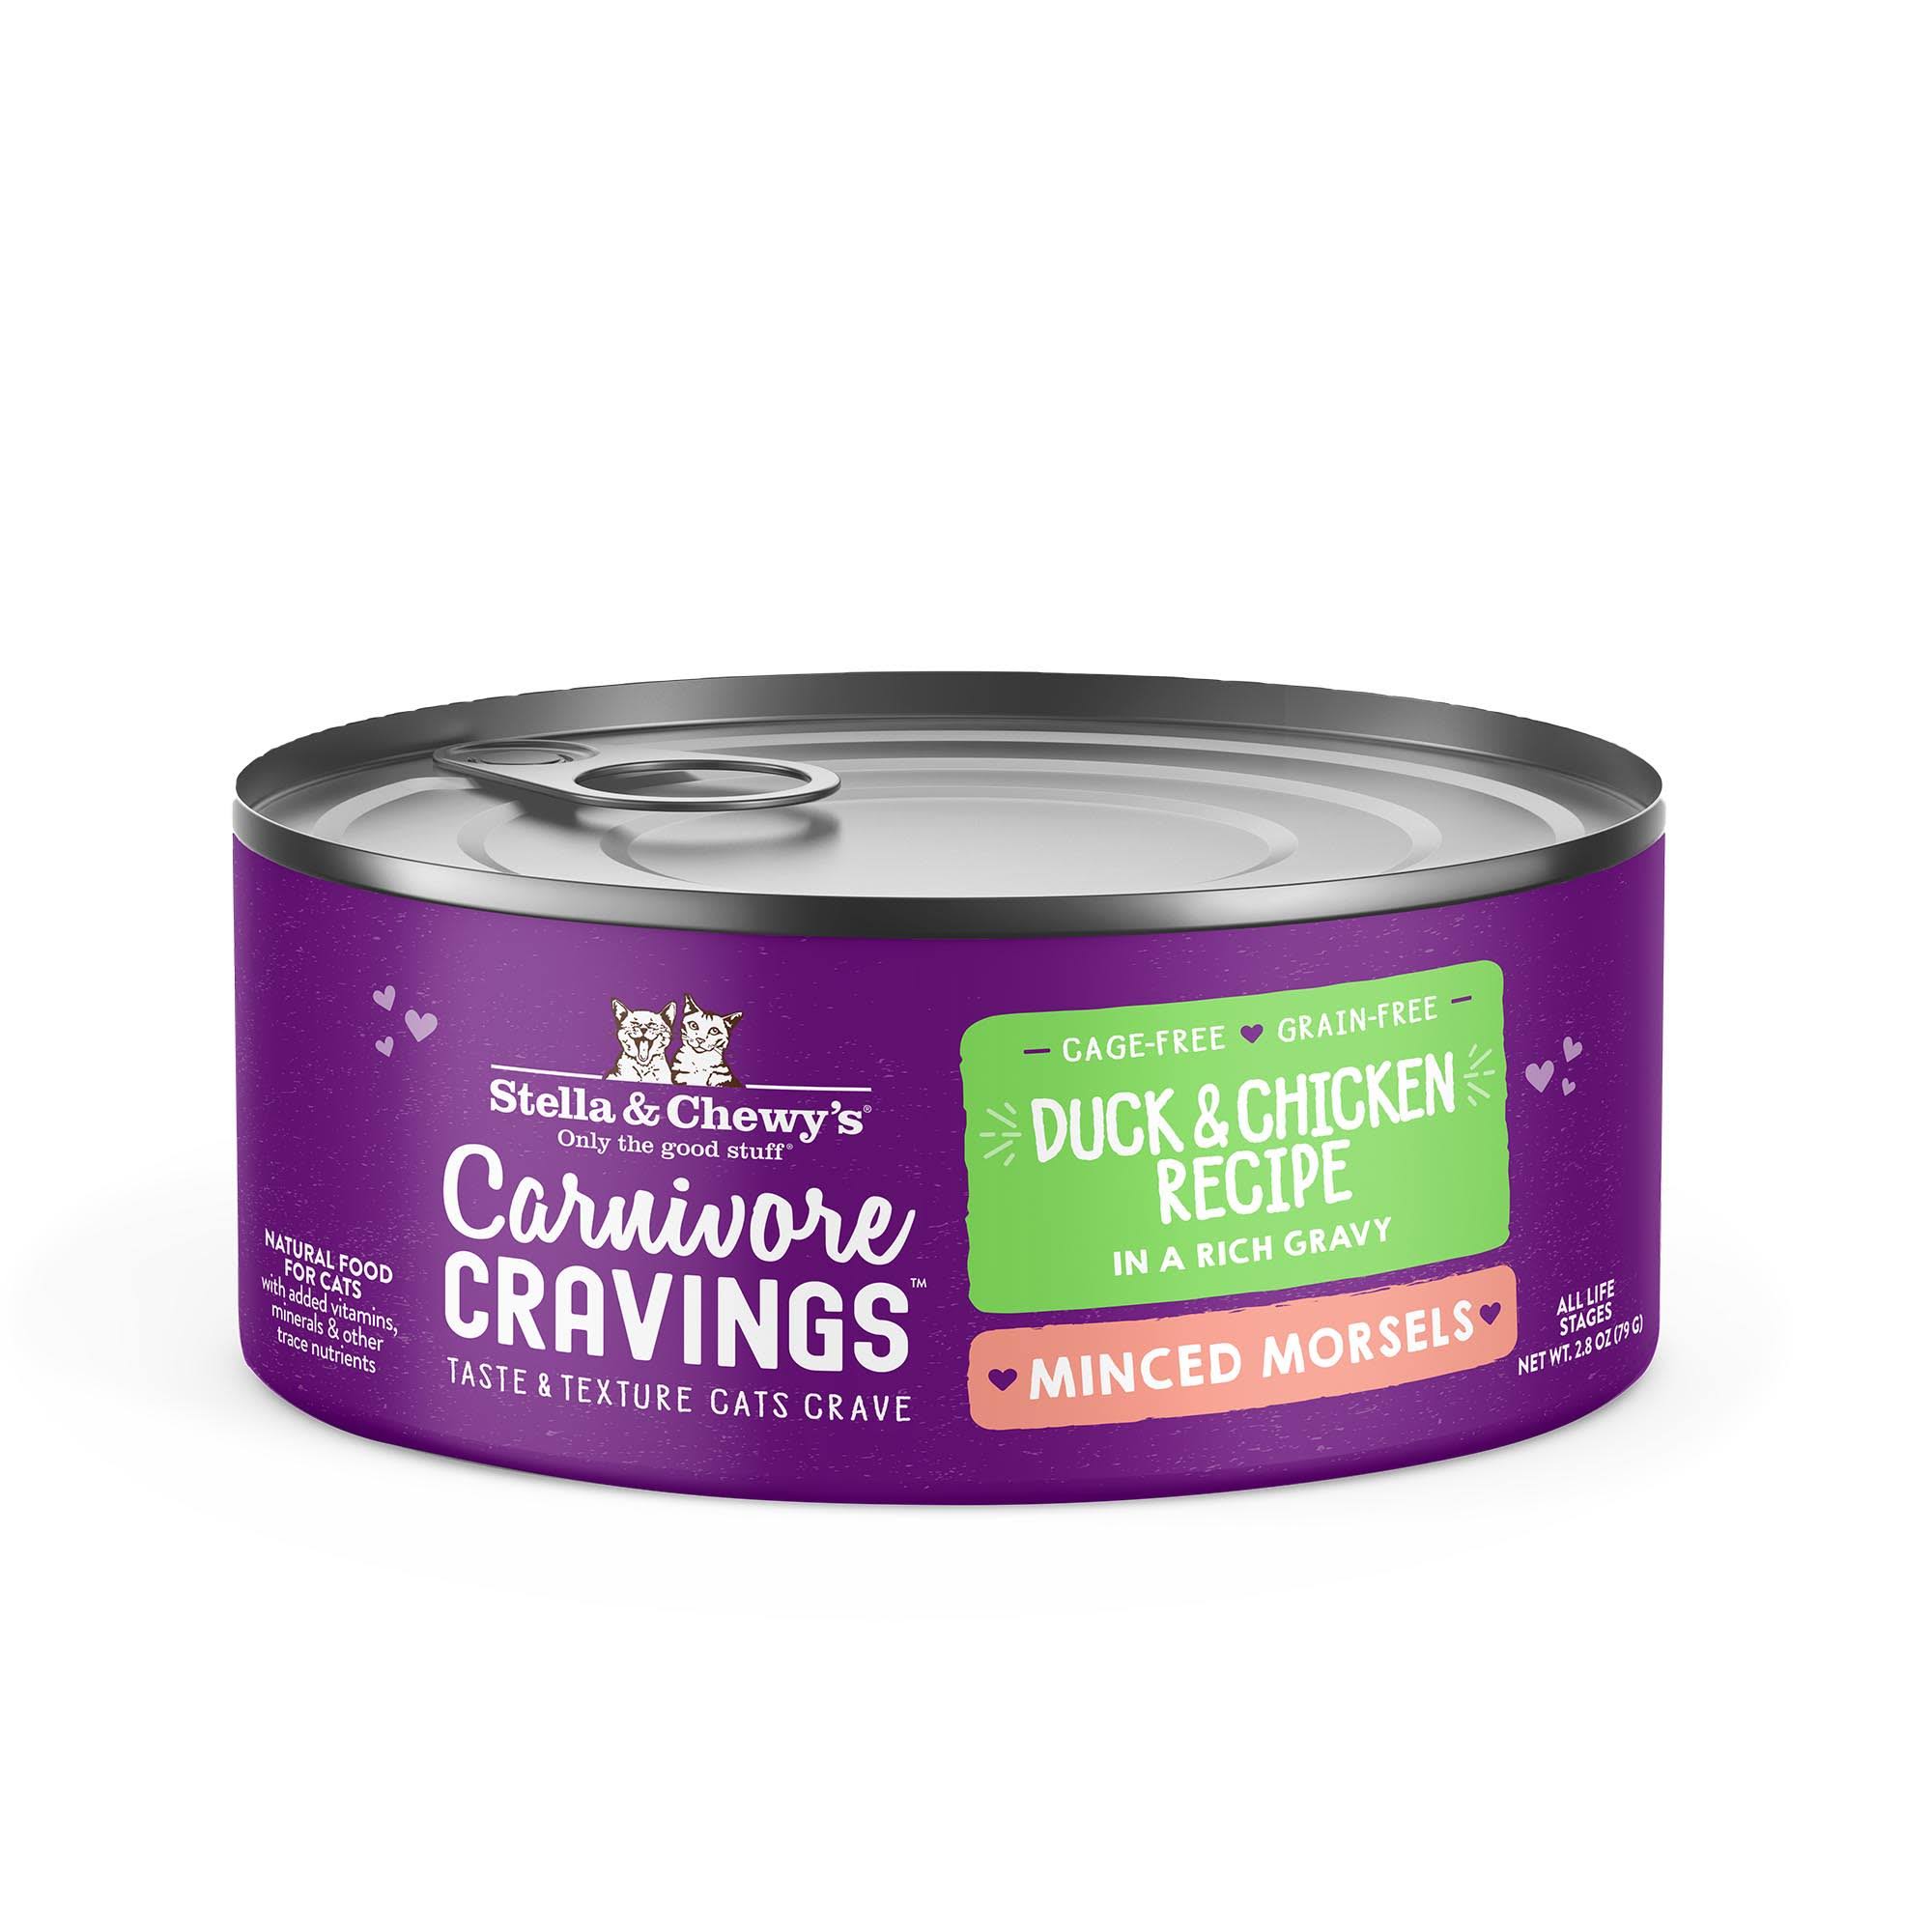 Stella & Chewy's Carnivore Cravings Minced Morsels Duck & Chicken Recipe Wet Cat Food, 2.8-oz